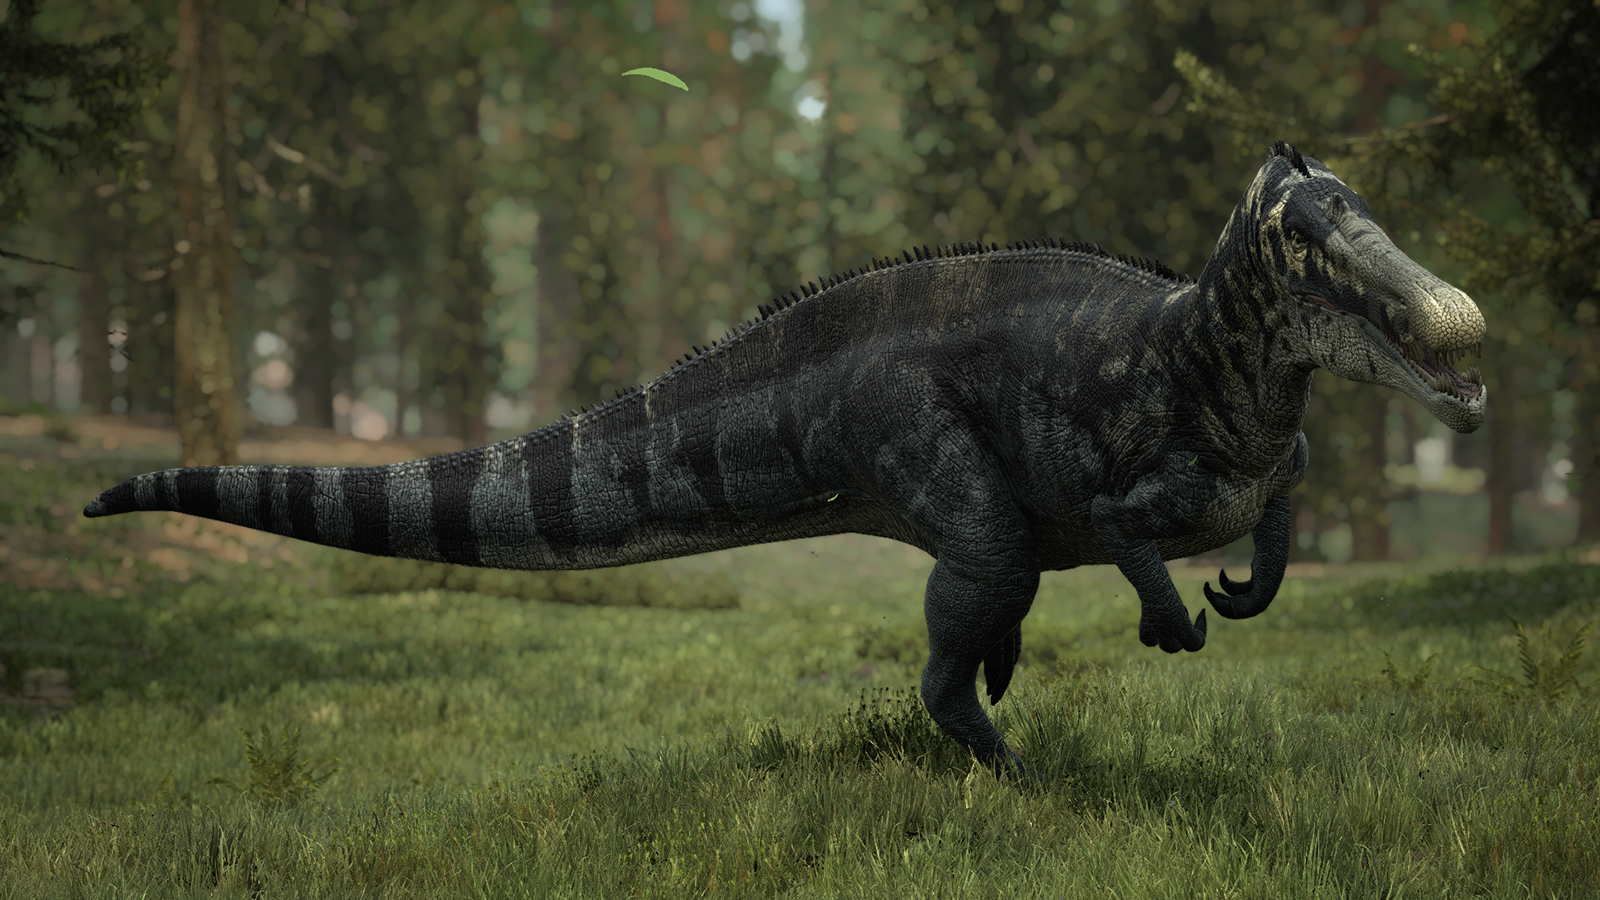 Suchomimus subspecies, map work, our mod cloud cooker, mobile UI updates